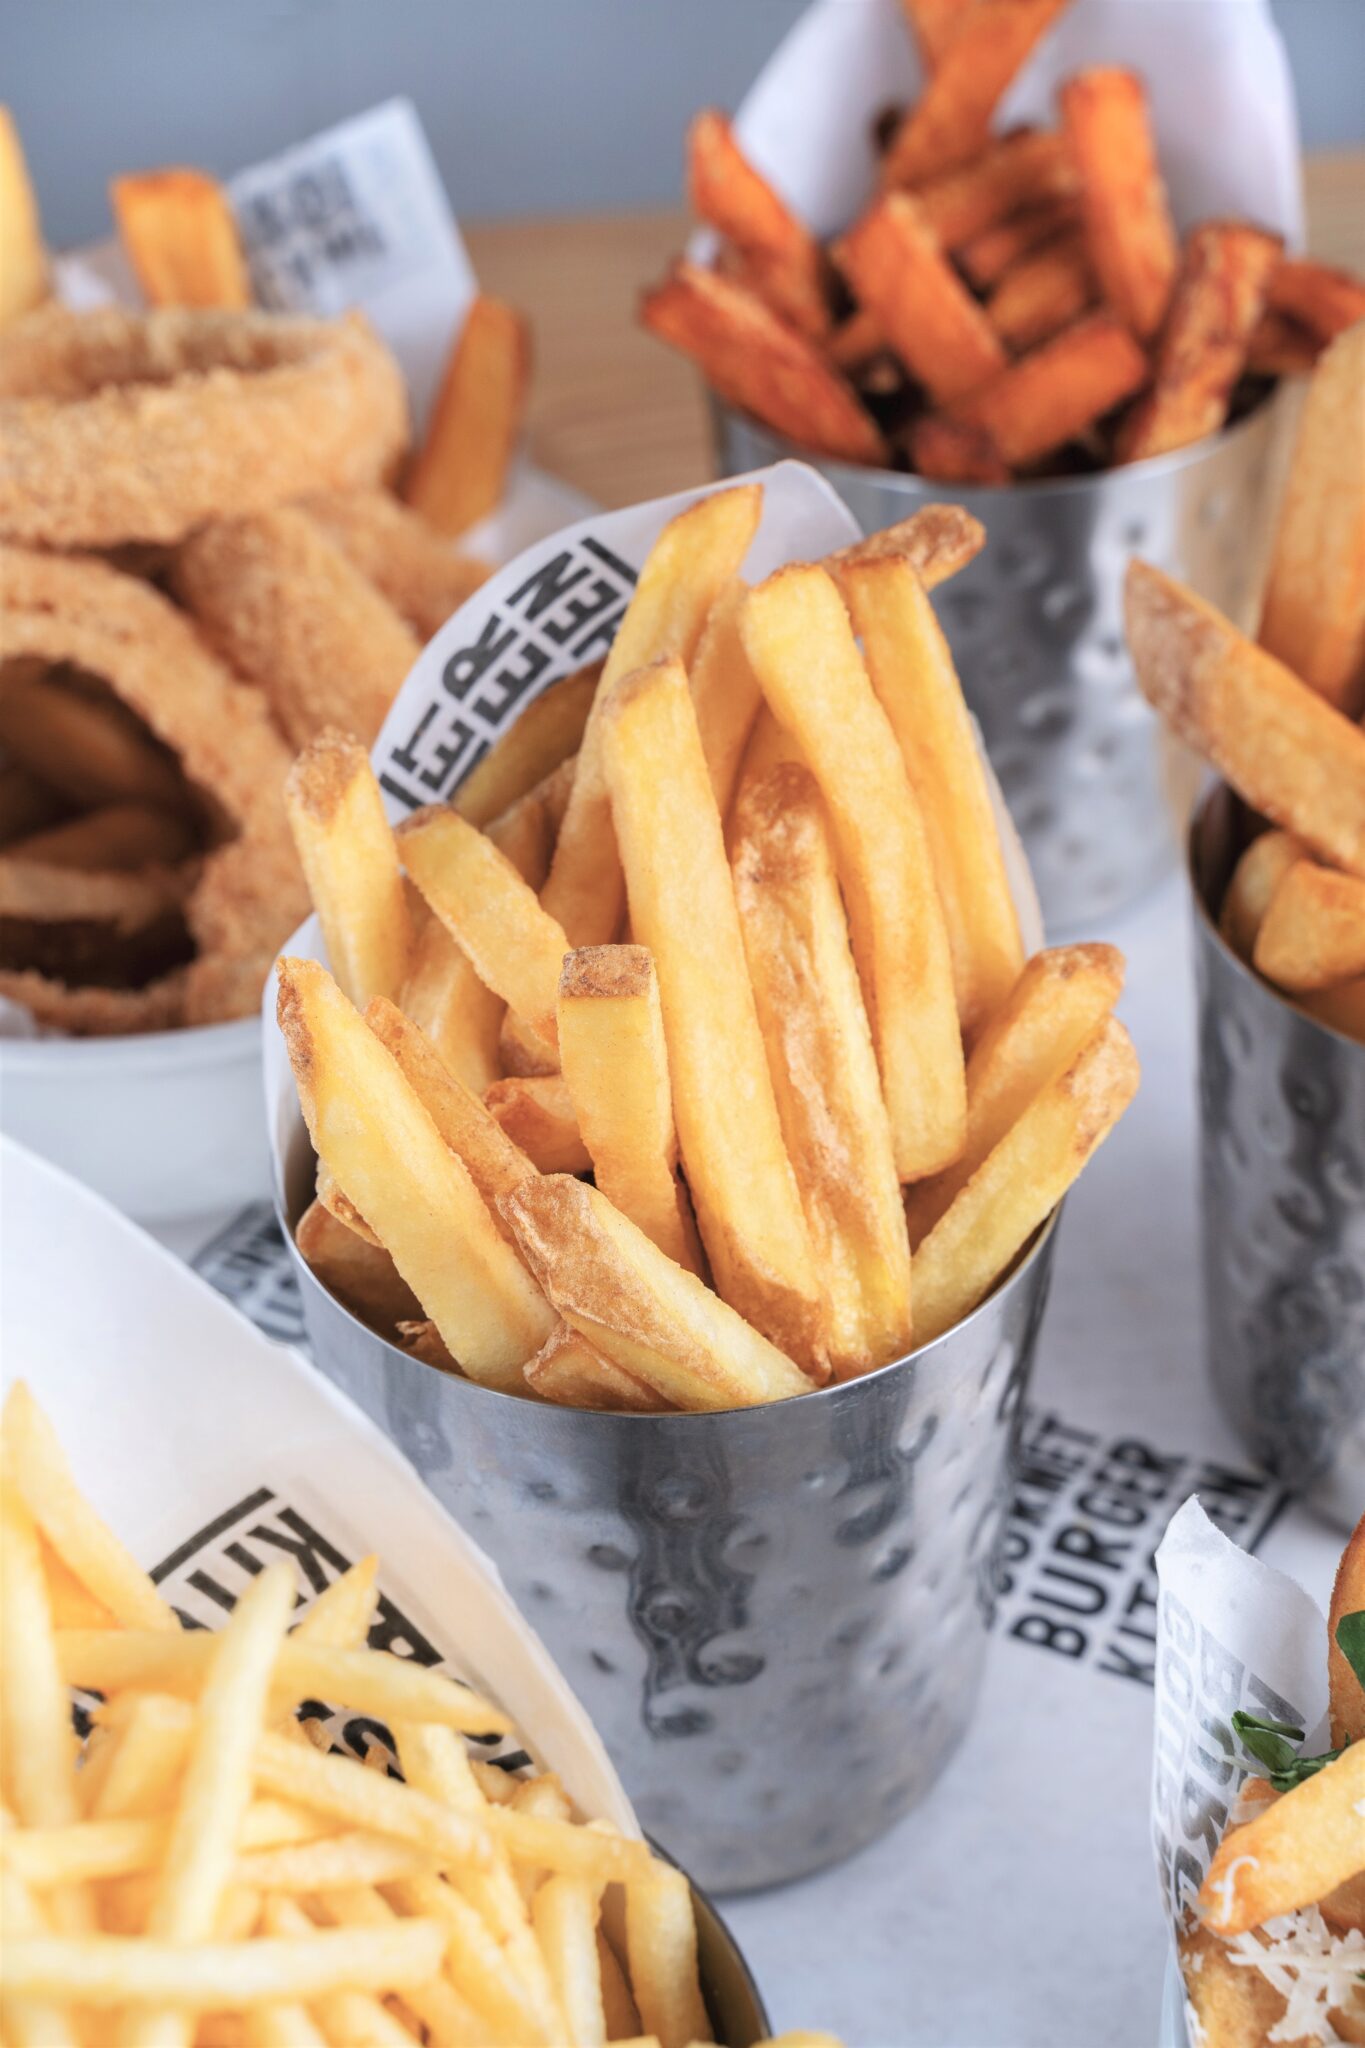 Different types of fries and onion rings are in individual portions. This article covers fan favorite apps in under 30 minutes.